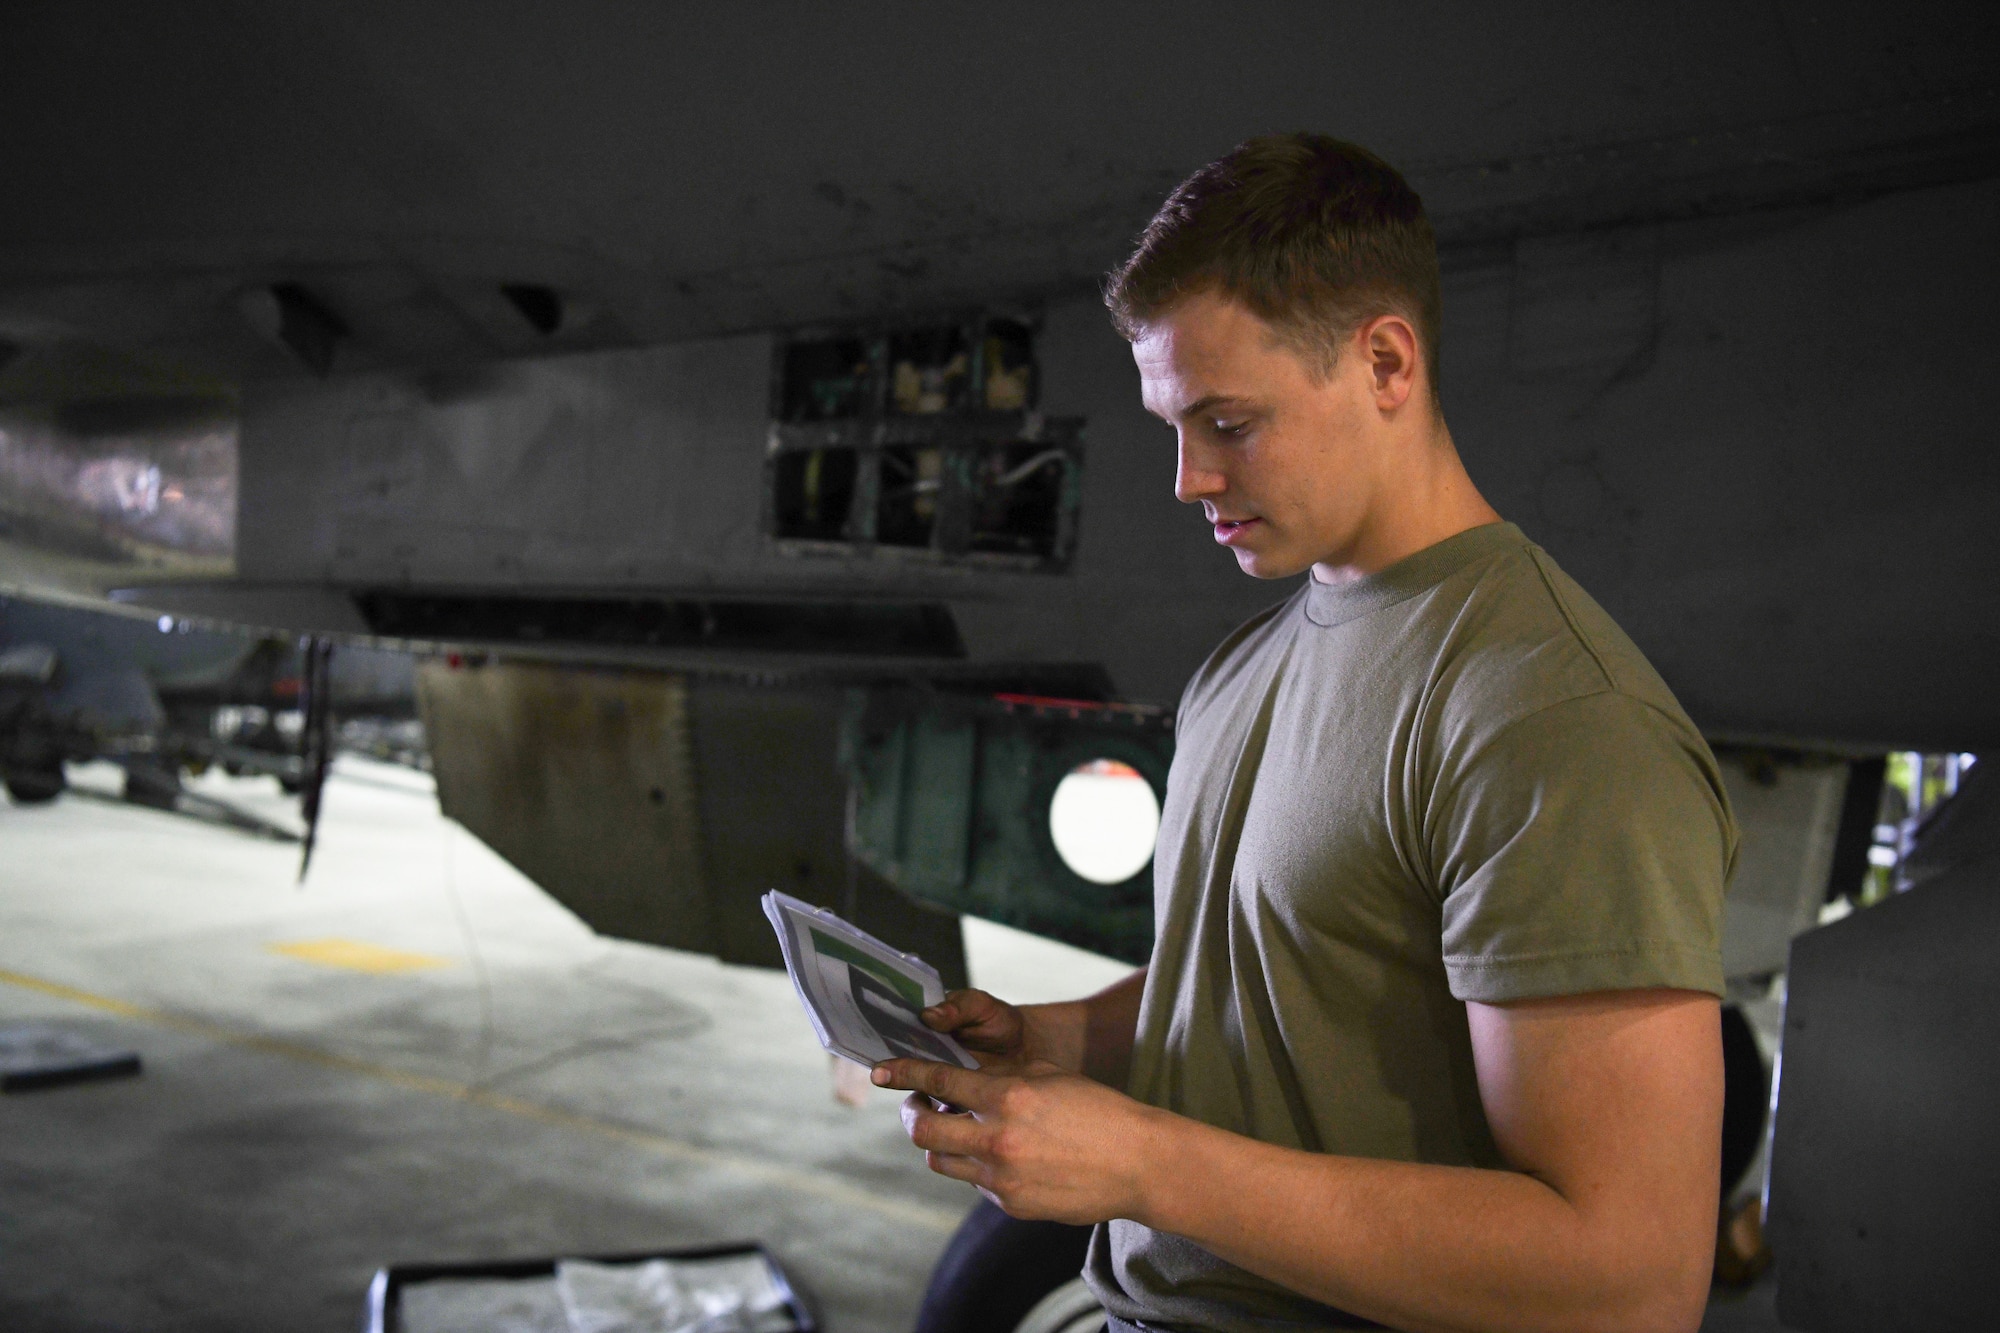 A 48th Equipment Maintenance Squadron crew chief consults an innovative new tool known as “The Bird Book” during a phase inspection at Royal Air Force Lakenheath, England, Aug. 13, 2019. The Bird Book is a collection of mechanical and troubleshooting processes for the F-15 aircraft assigned to RAF Lakenheath. (U.S. Air Force photo by Airman 1st Class Shanice Williams-Jones)